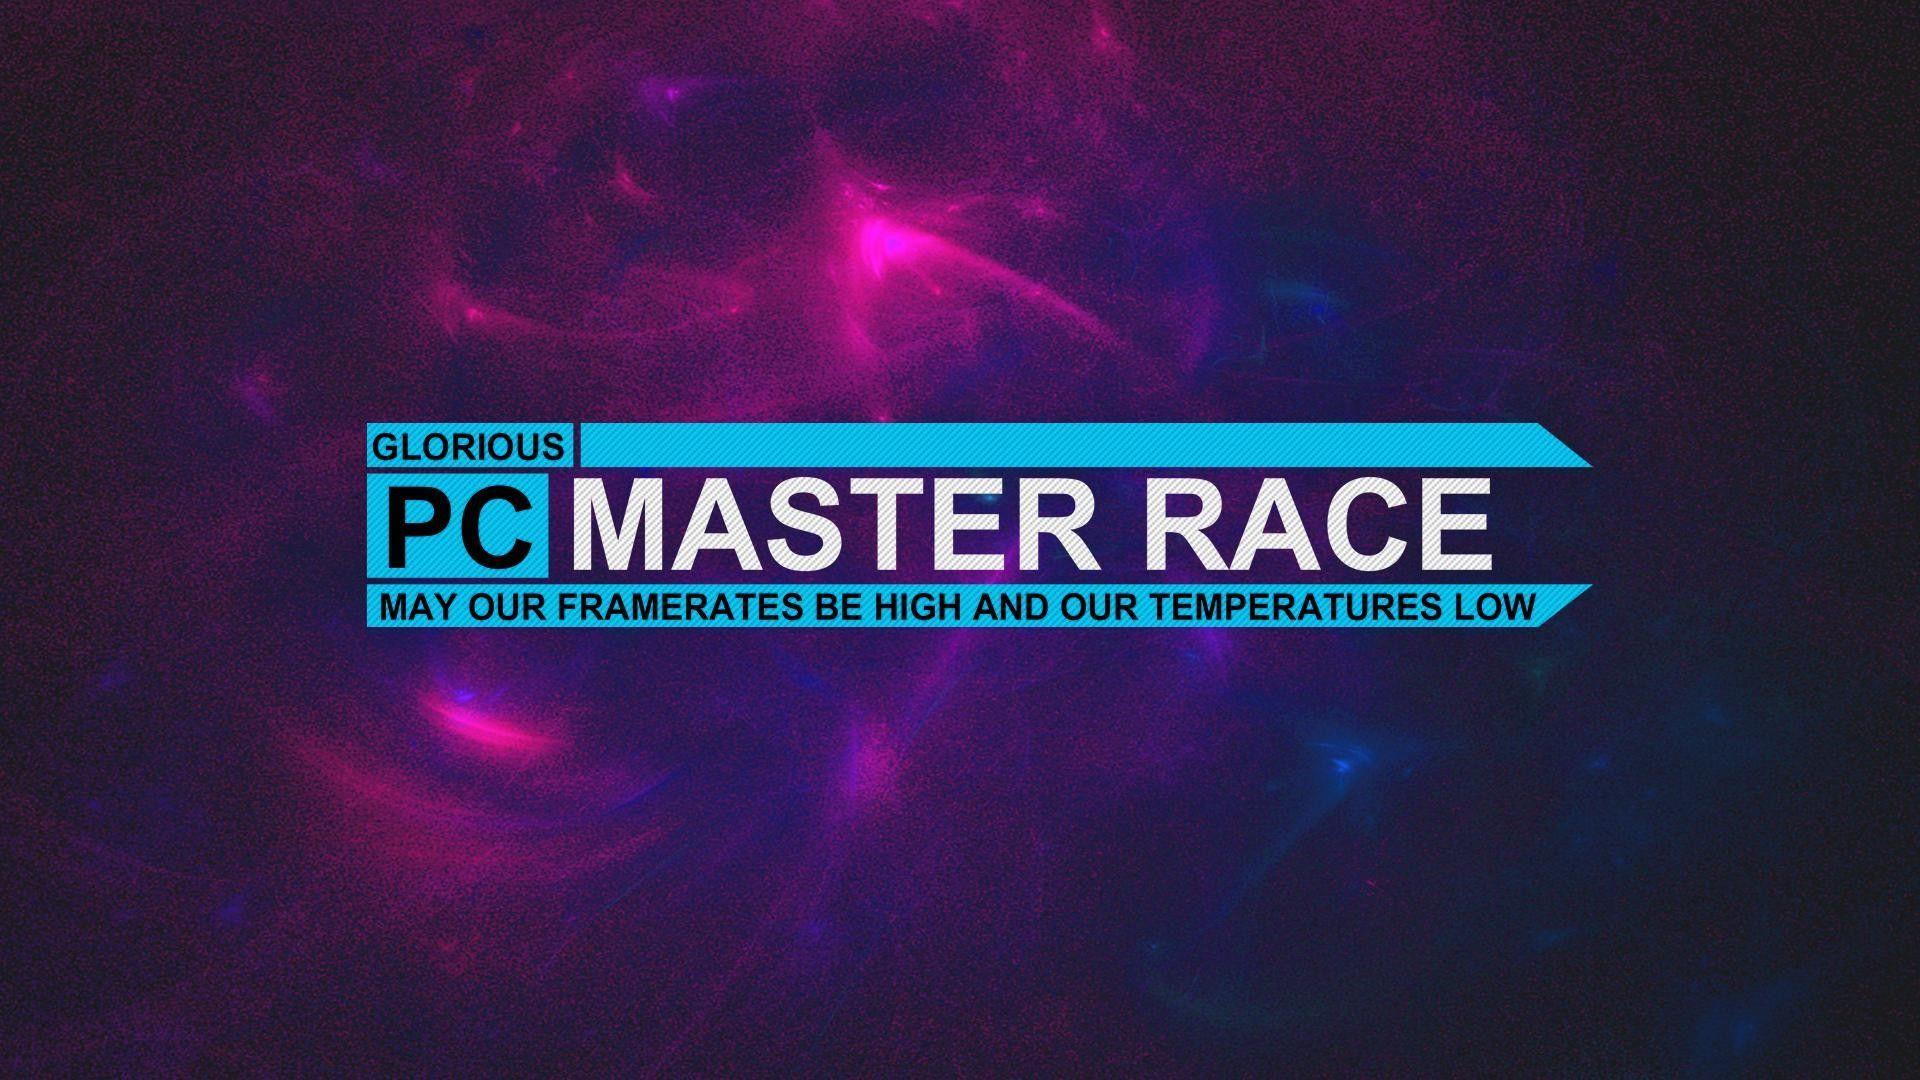 Master glory. PC Master Race. PCMR Wallpapers. PCMR White Wallpaper. PCMR 4k Wallpaper.